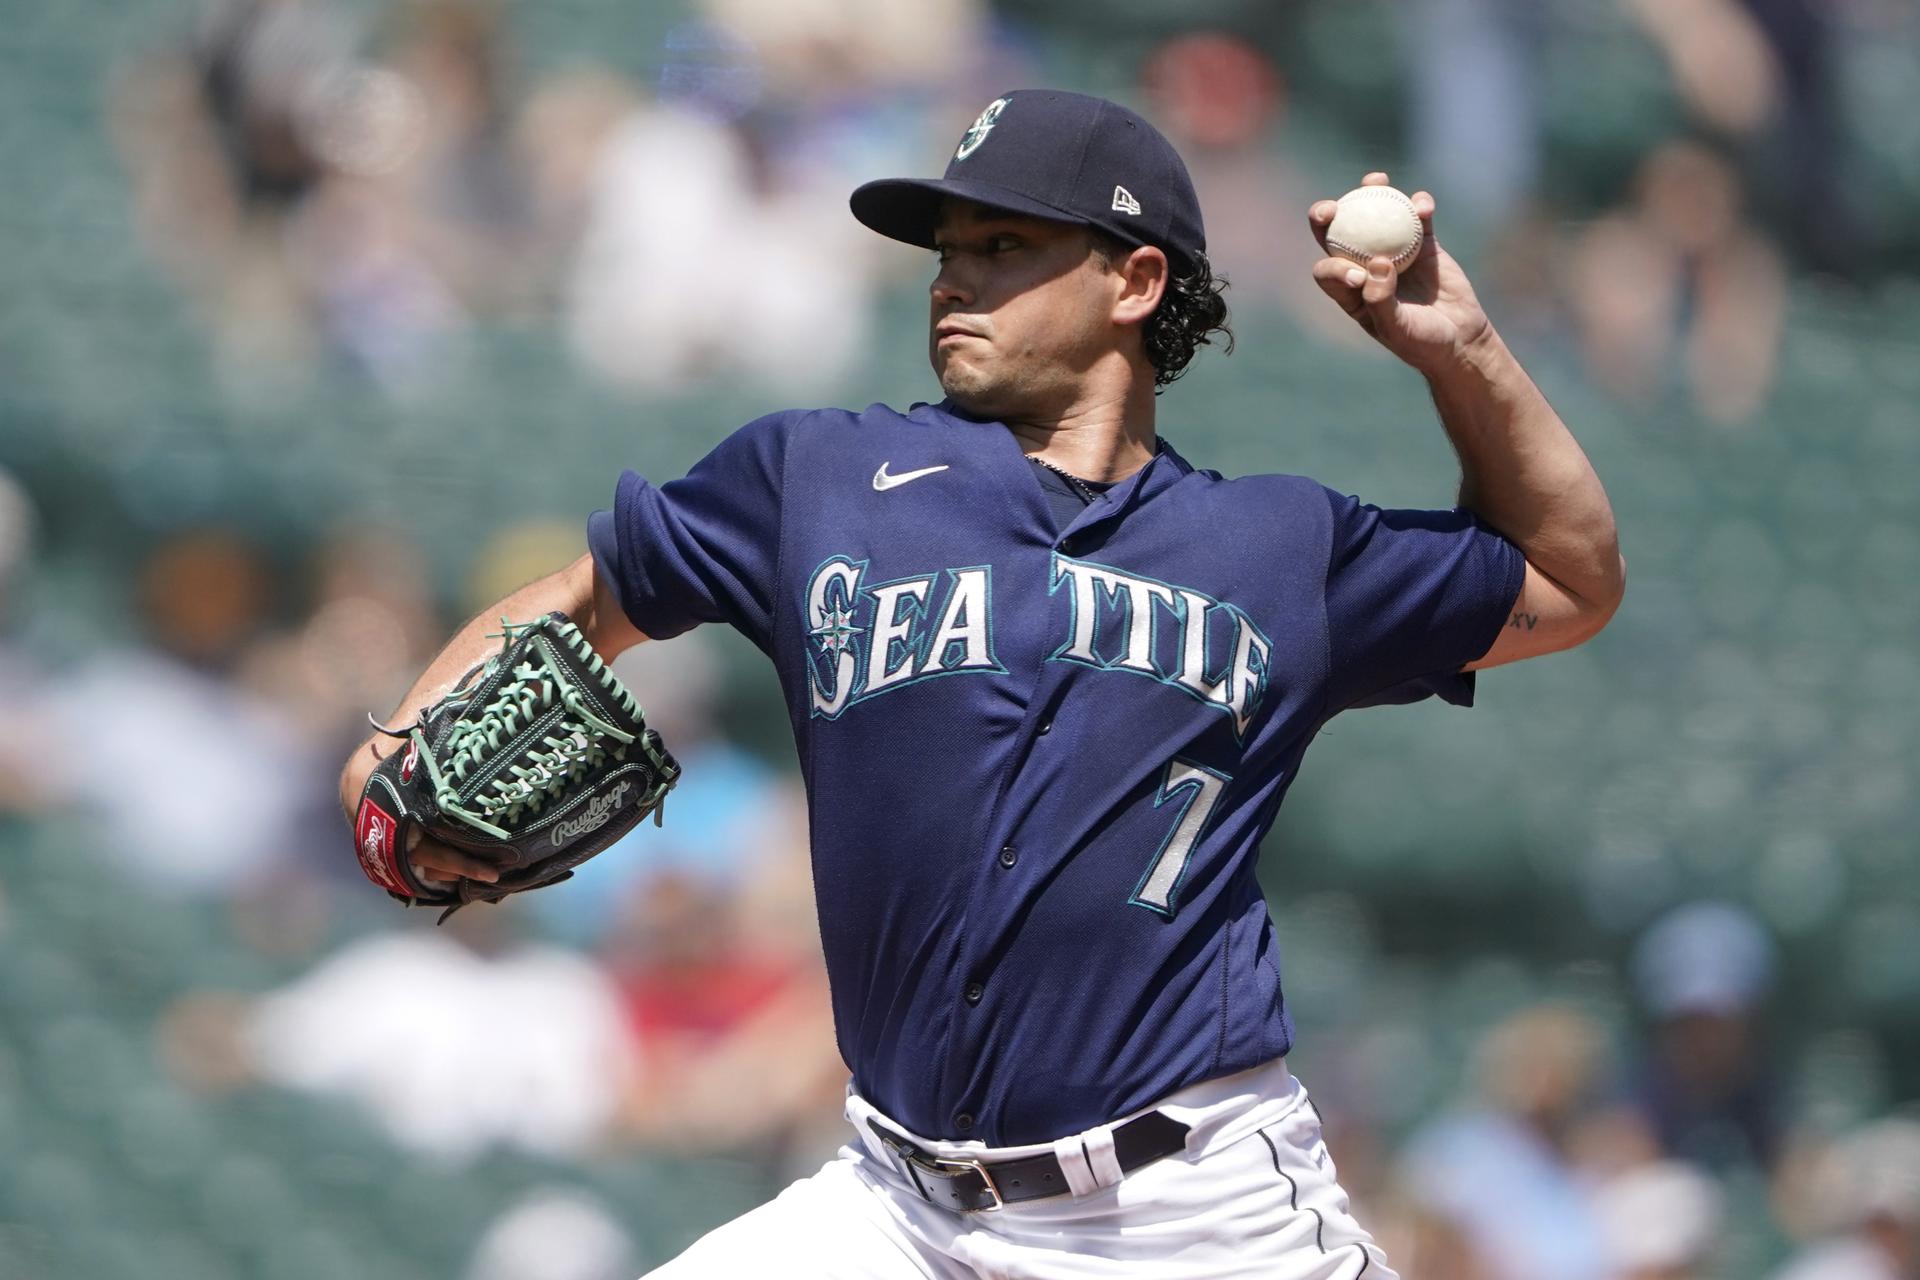 Mariners vs. Yankees Player Prop Bets Today – August 1, 2022: Expect the Yankees to Get Their Steps In